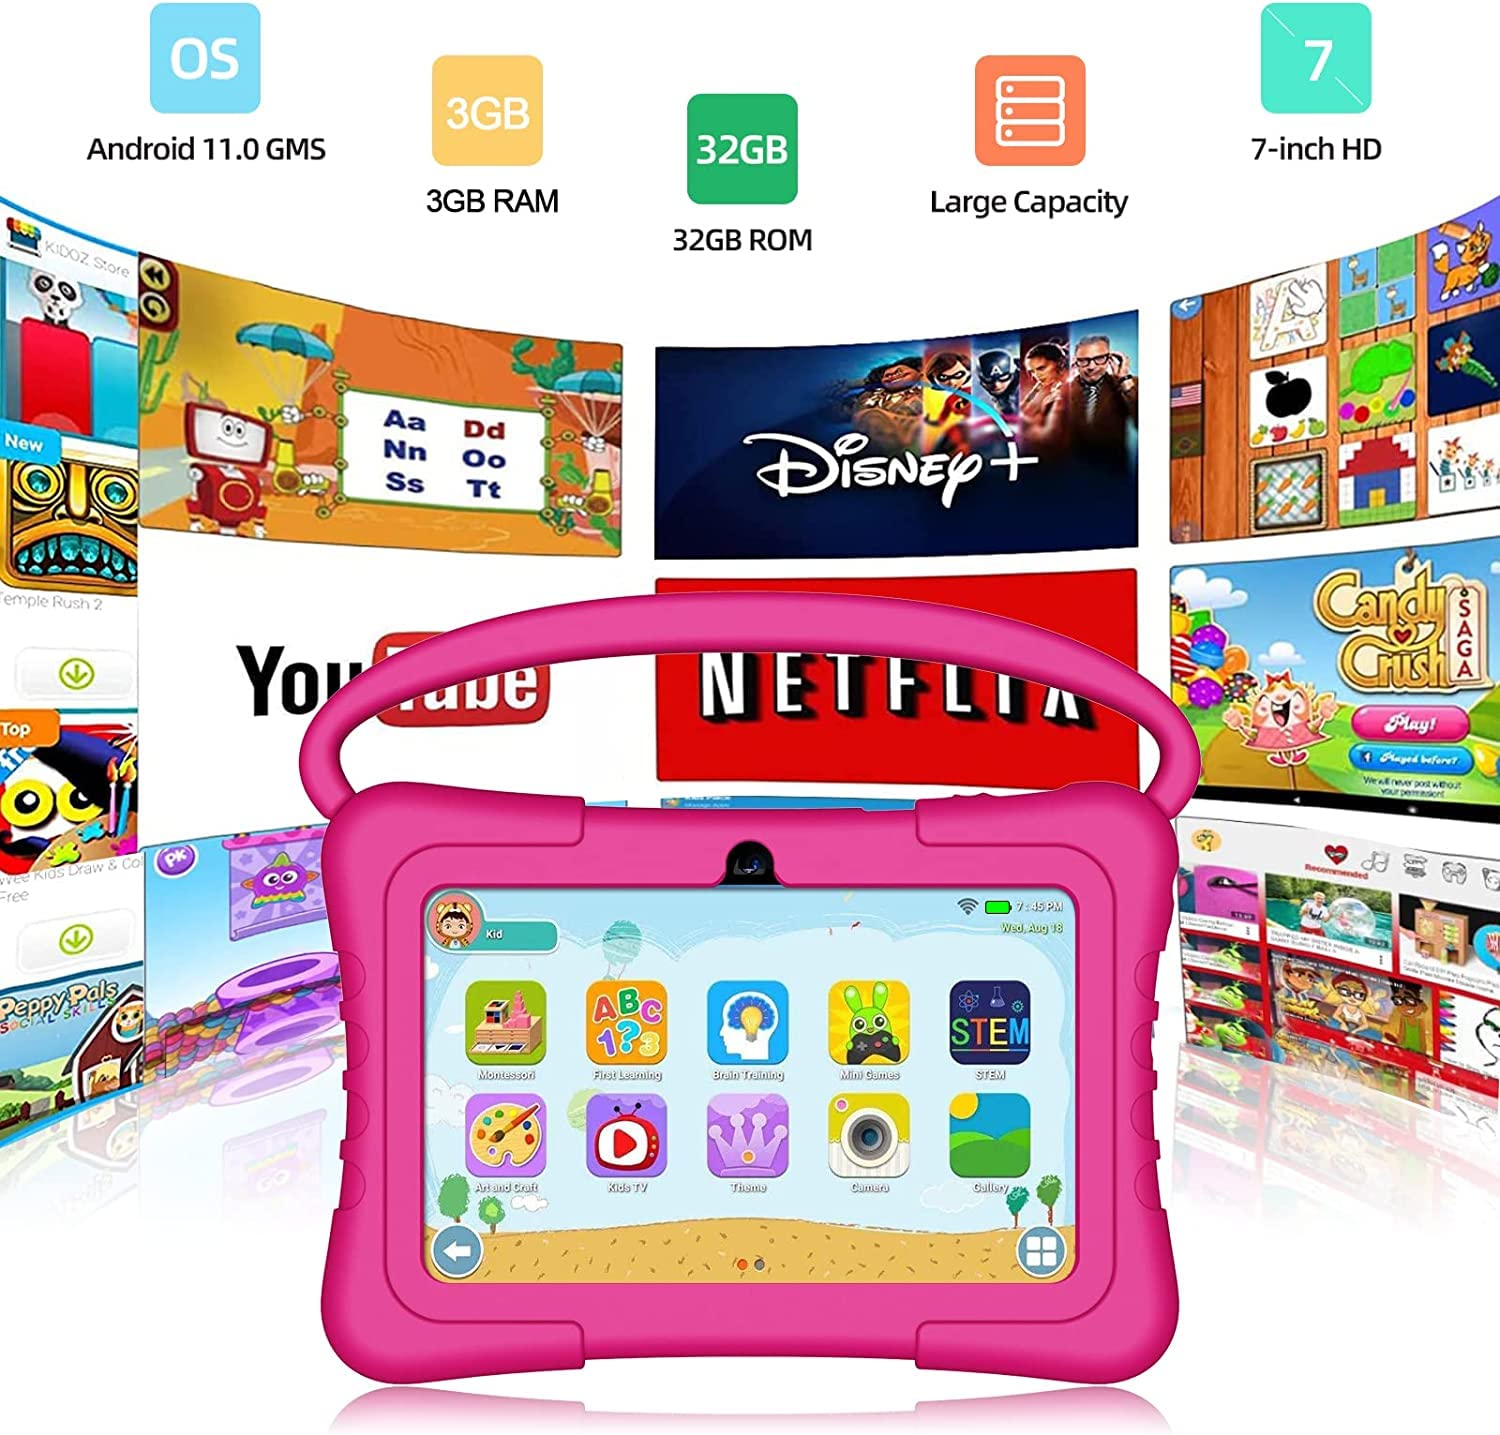 Kids Tablet, 7 inch Tablet for Kids 3GB RAM 32GB ROM Android 11 Toddler Tablet with Bluetooth, WiFi, GMS, Parental Control, HD Dual Camera, Shockproof Case, Google Play, Netflix, YouTube(Pink)